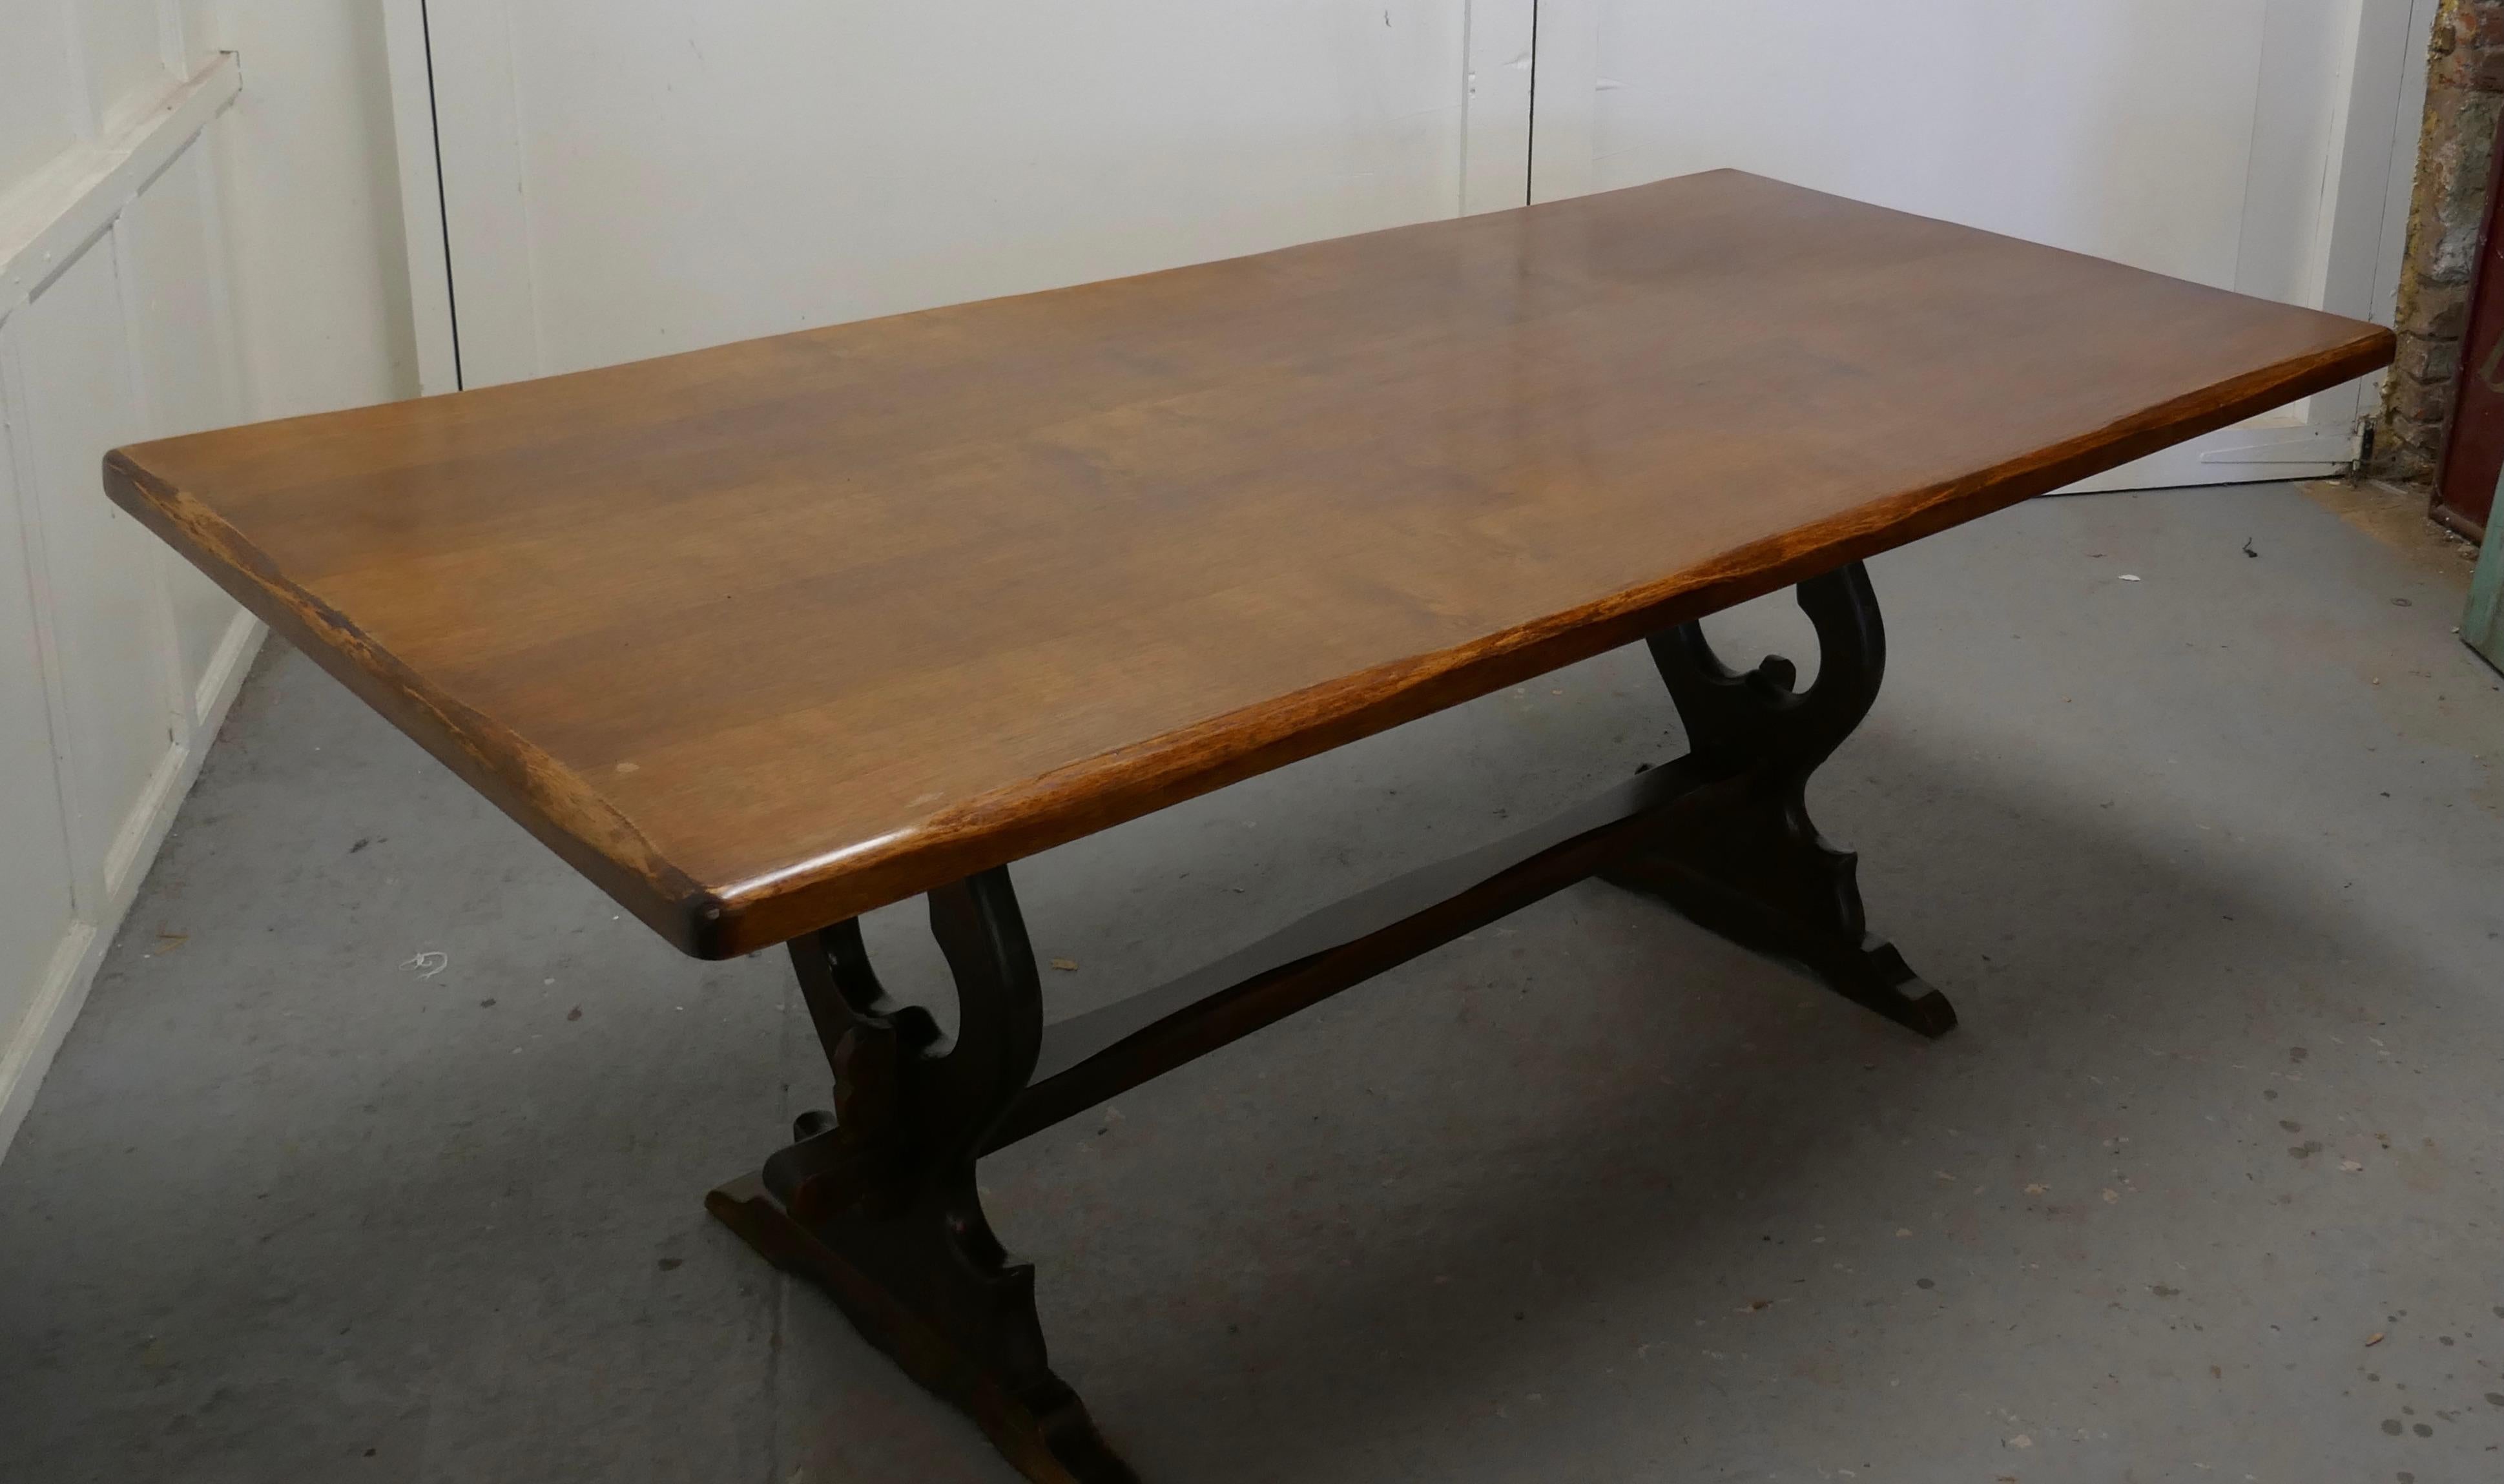 Oak refectory table

This is a superb piece it is a very heavy oak country table, a refectory style table, the top is 2” thick, with a slightly wavy chamfered edge 
 
The table is a beautiful deep colour, it has a good finish, it is sound and